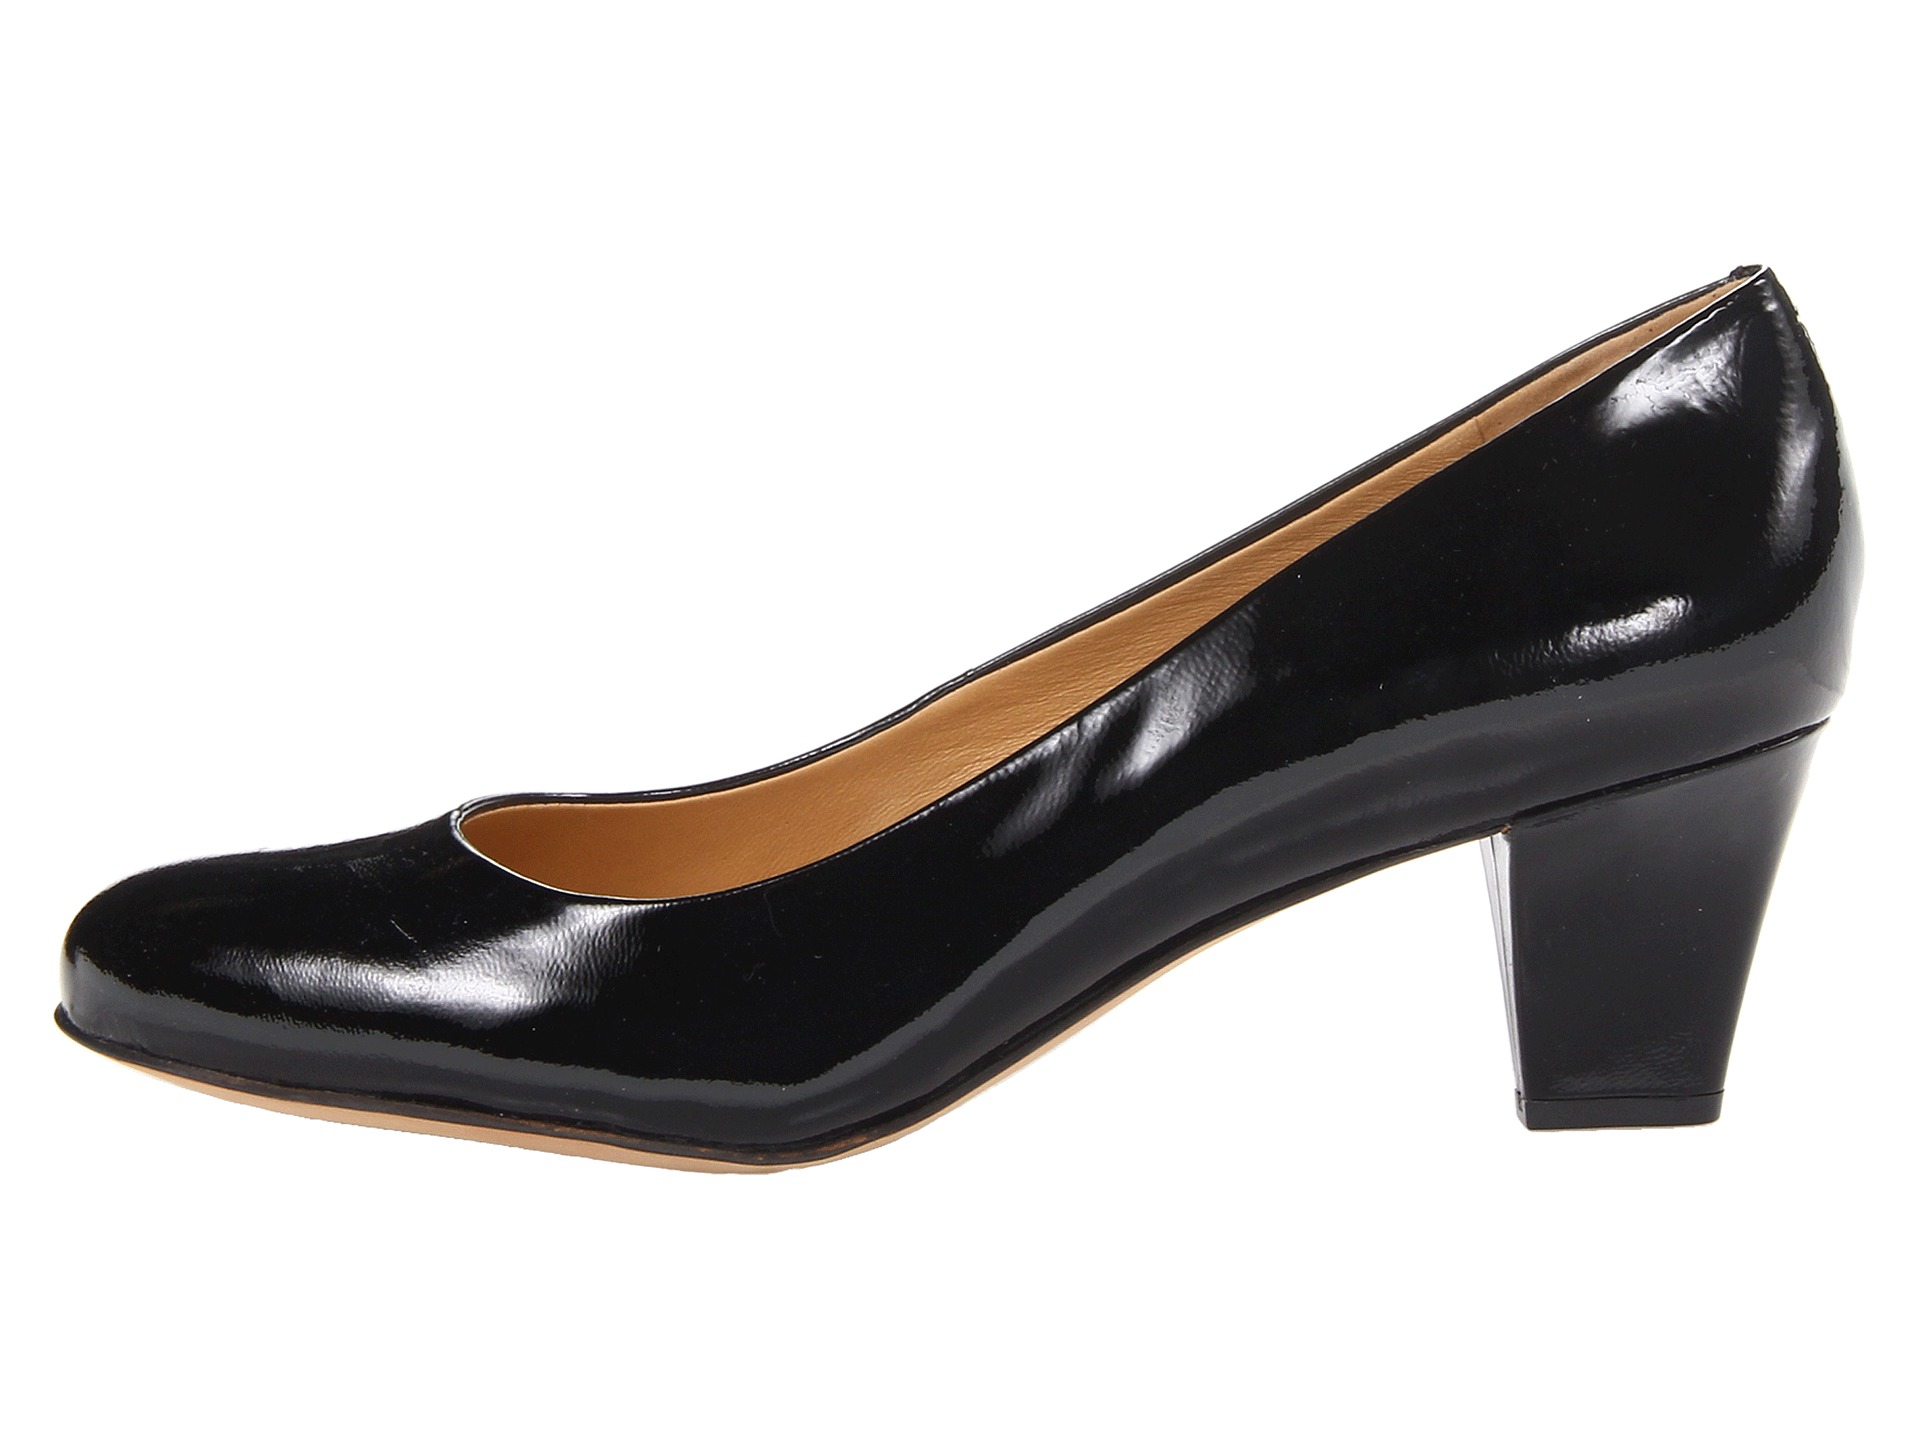 Trotters Penelope Black Patent Leather - Zappos.com Free Shipping BOTH Ways